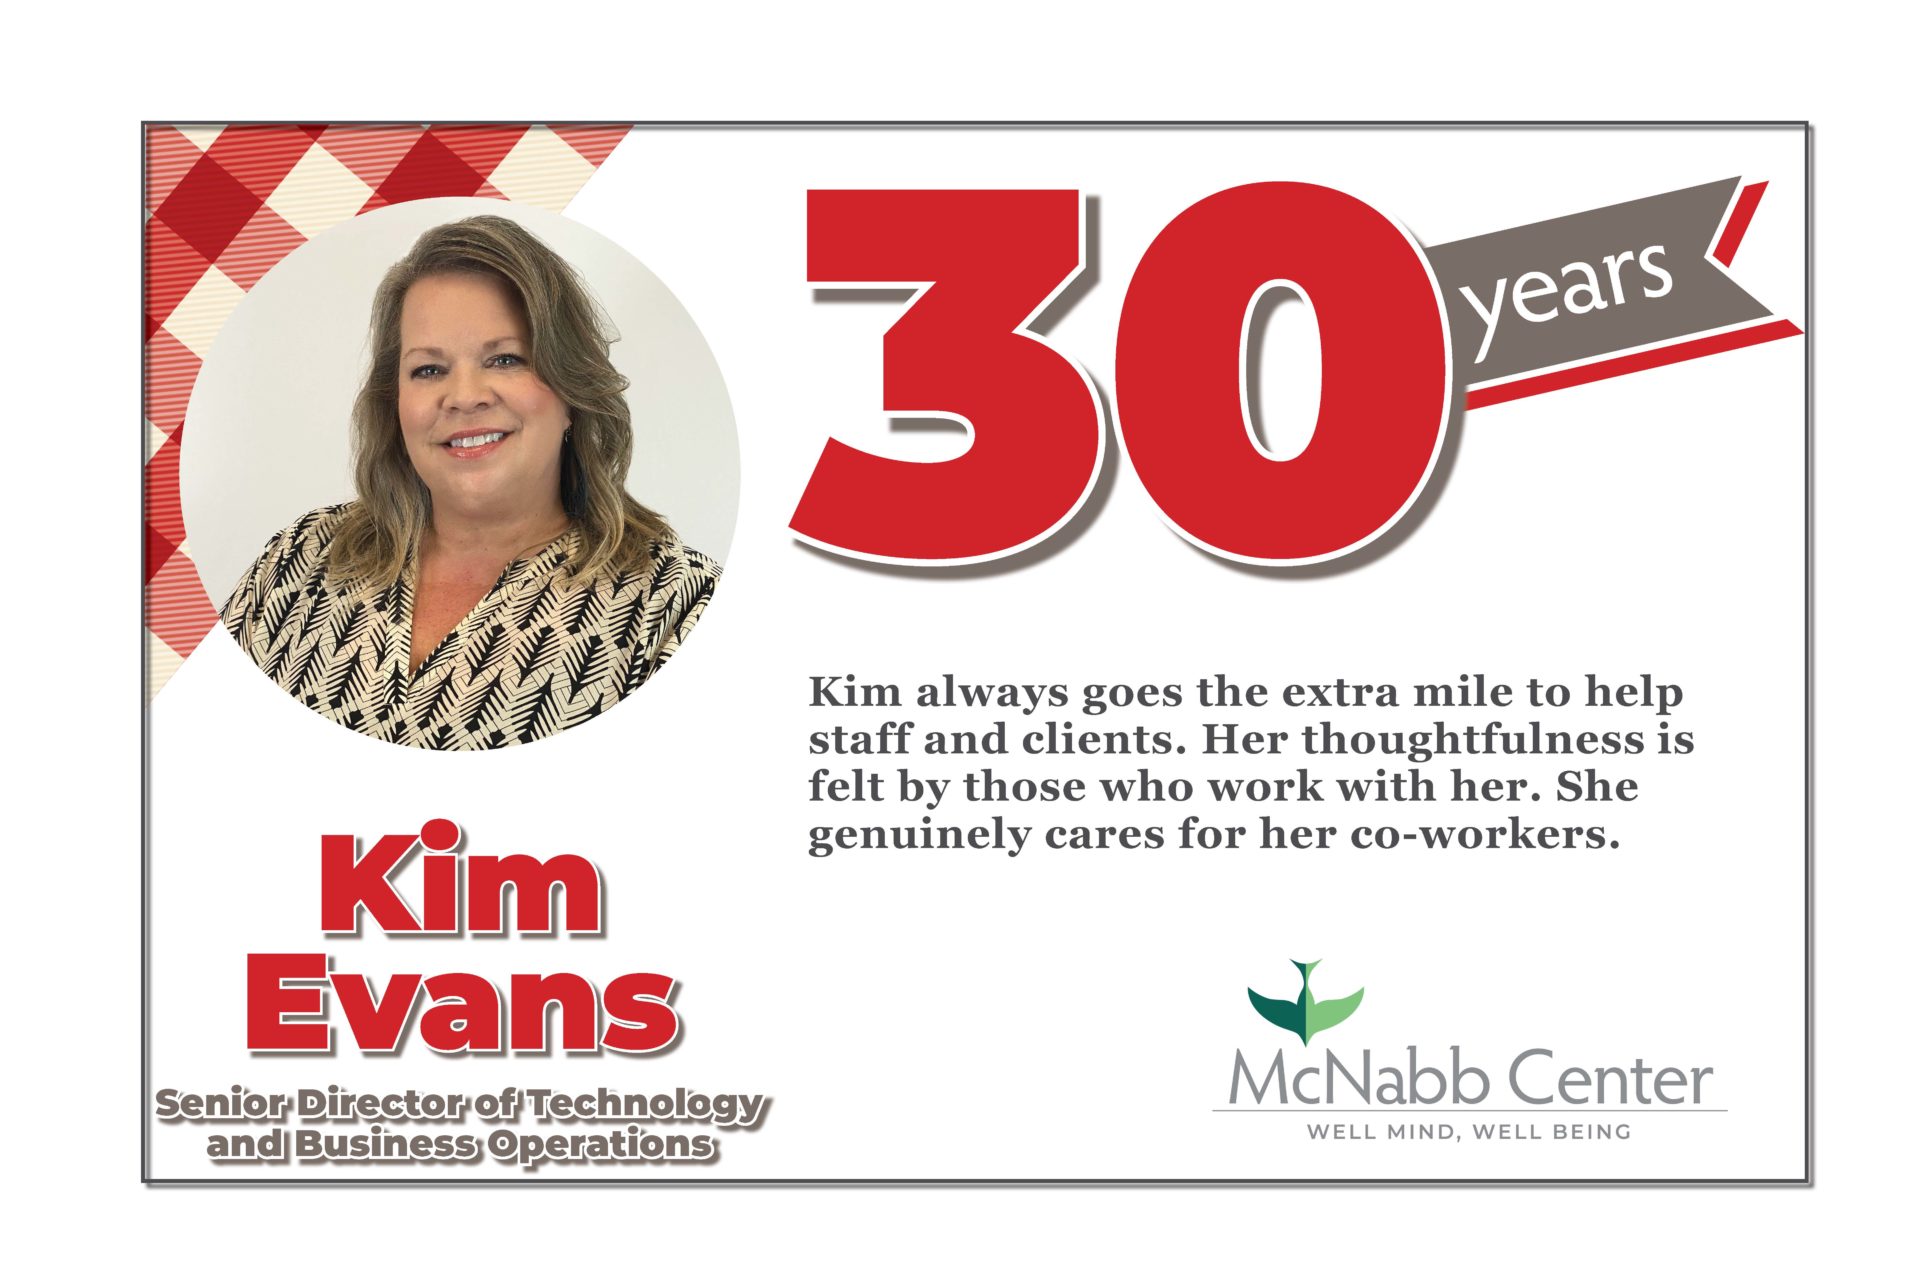 This image portrays Kim Evans by McNabb Center.